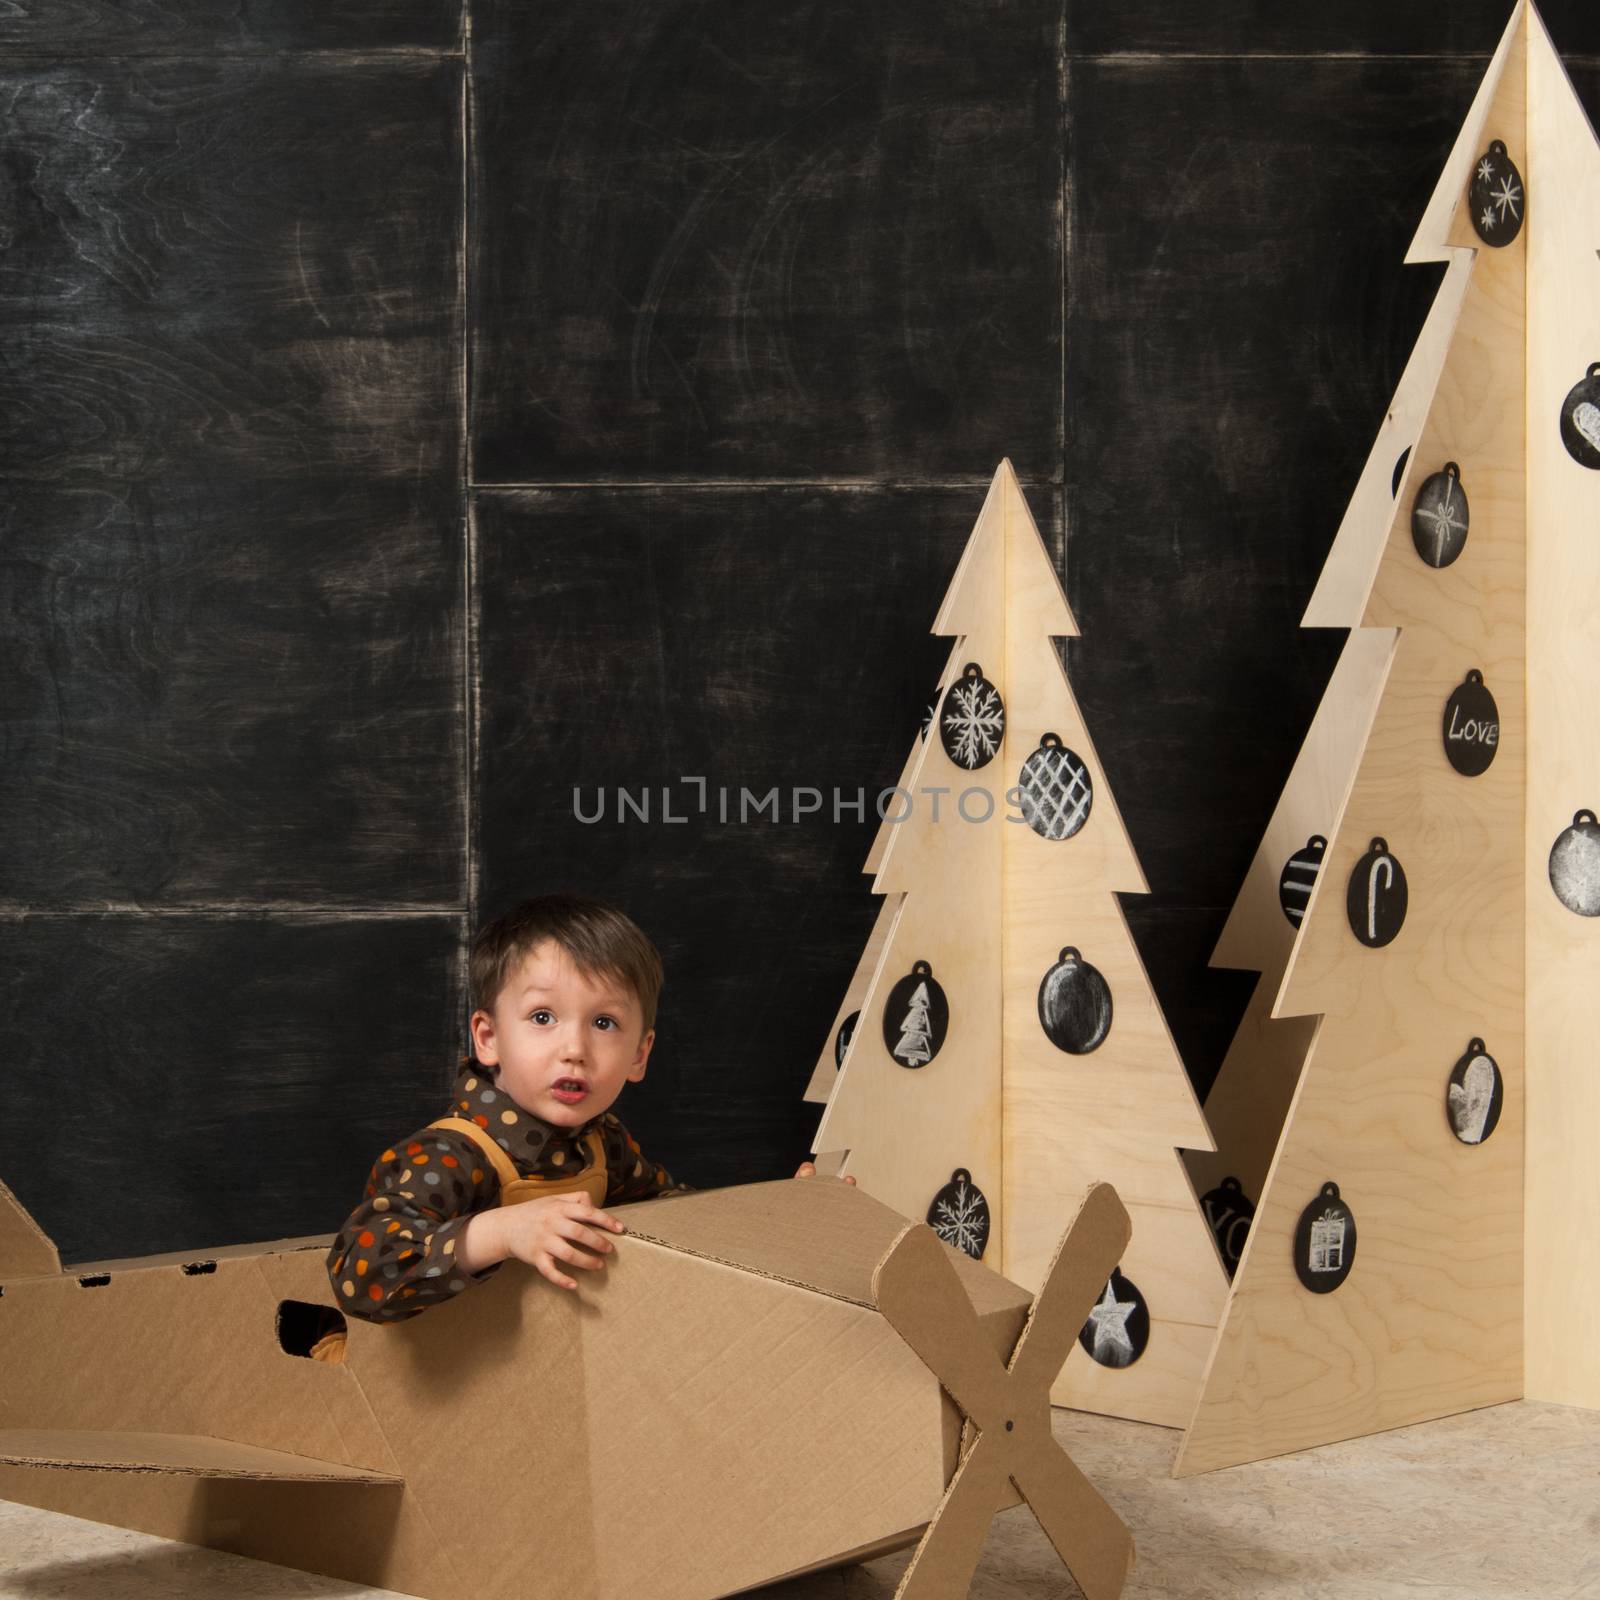 small boy sits in a cardboard toy aircraft near Christmas trees made of wood